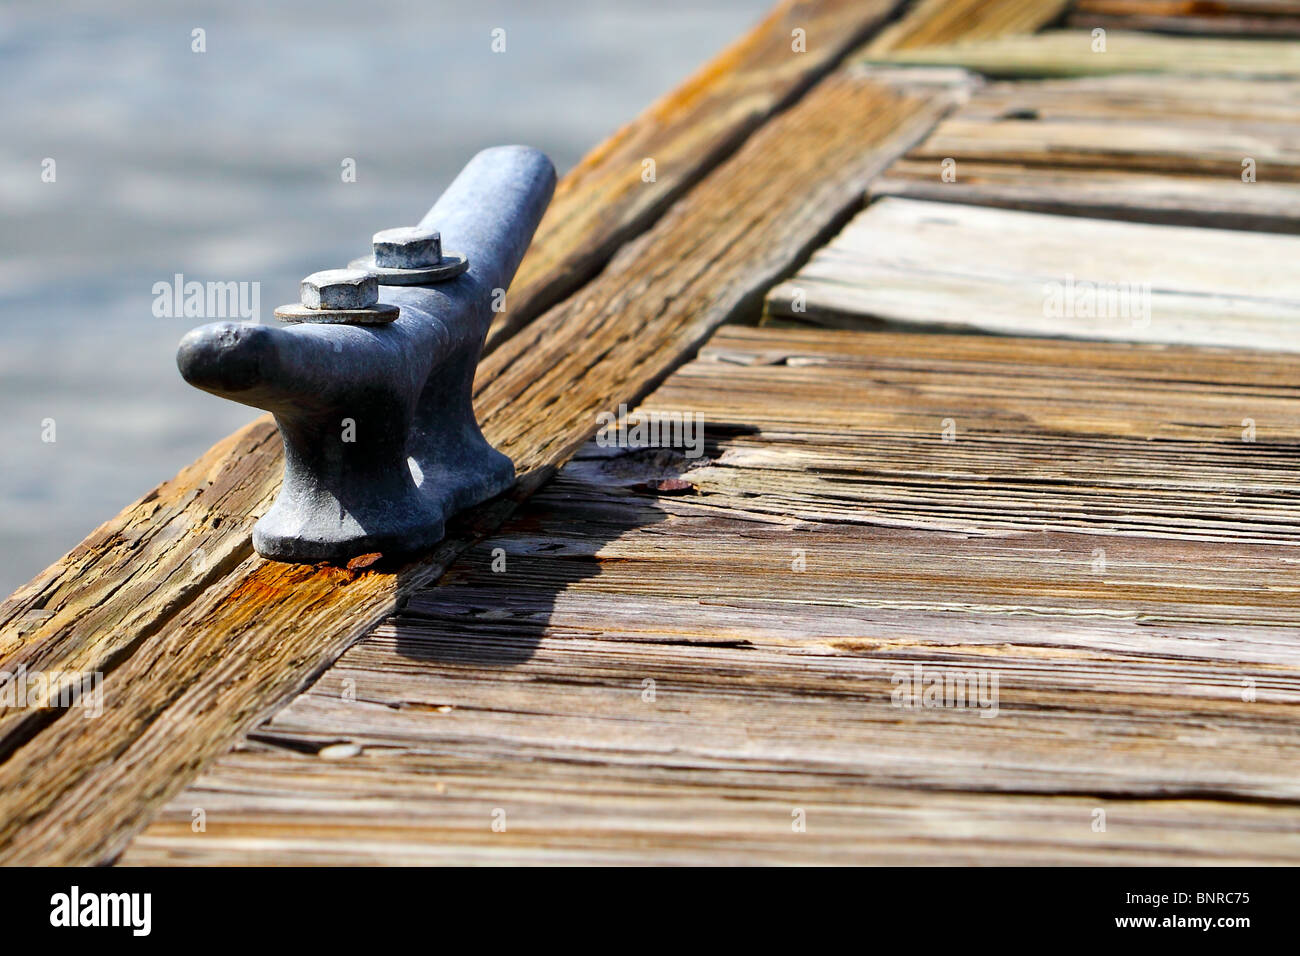 Close-Up of Boating Cleat Stock Photo